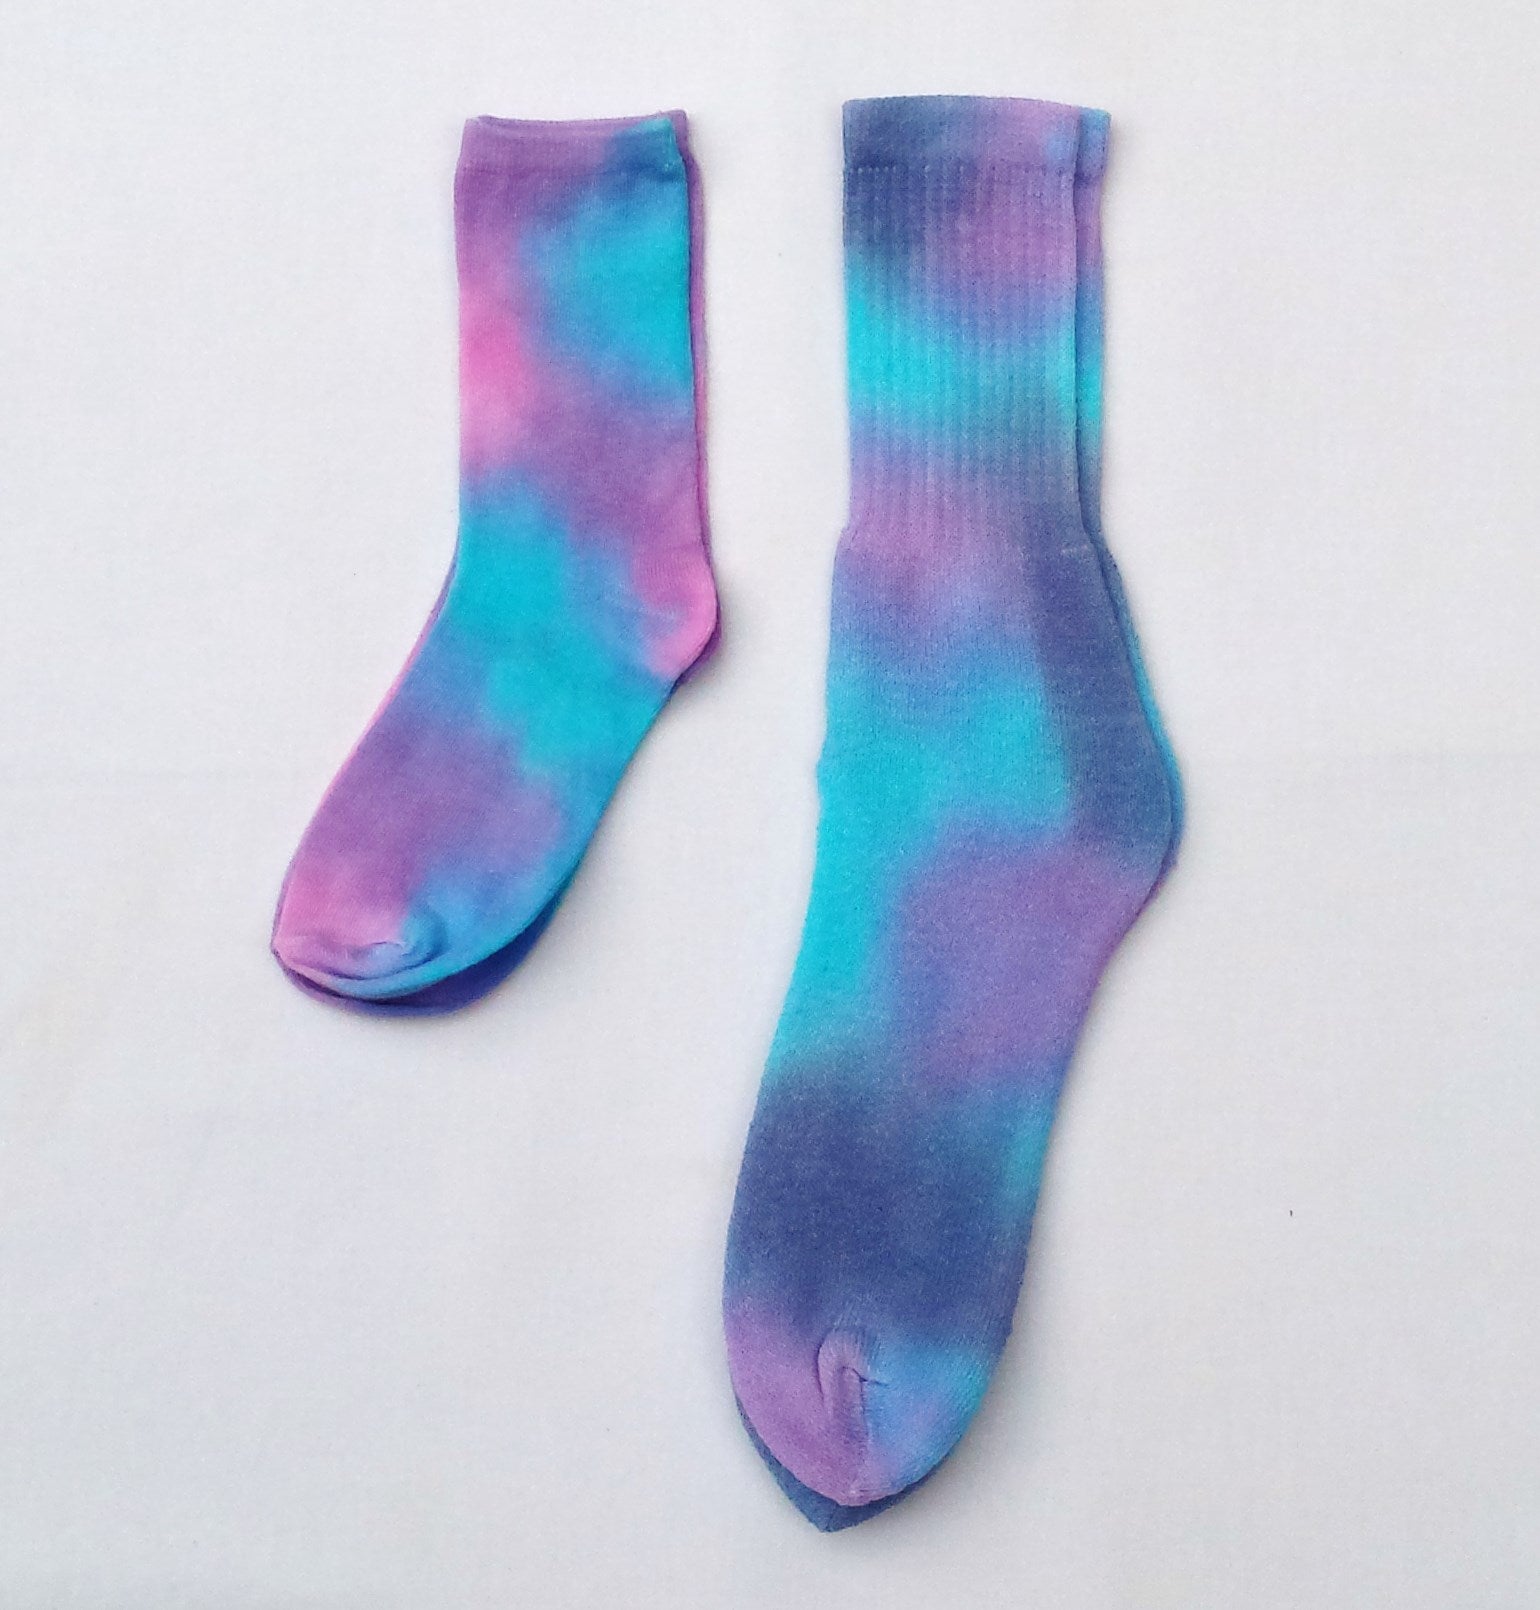 x2 pairs of hand dyed socks, various colours. Choose from x2 pairs women's ankle socks/ x1 pair women's ankle socks + x1 pair unisex sports socks/ x2 pairs unisex sports socks.  In 100% cotton.  In 100% cotton, thick warm socks in stretchy cotton fabric.  Men's/unisex socks to fit UK 8-12 Women's ankle socks to fir UK 4-8